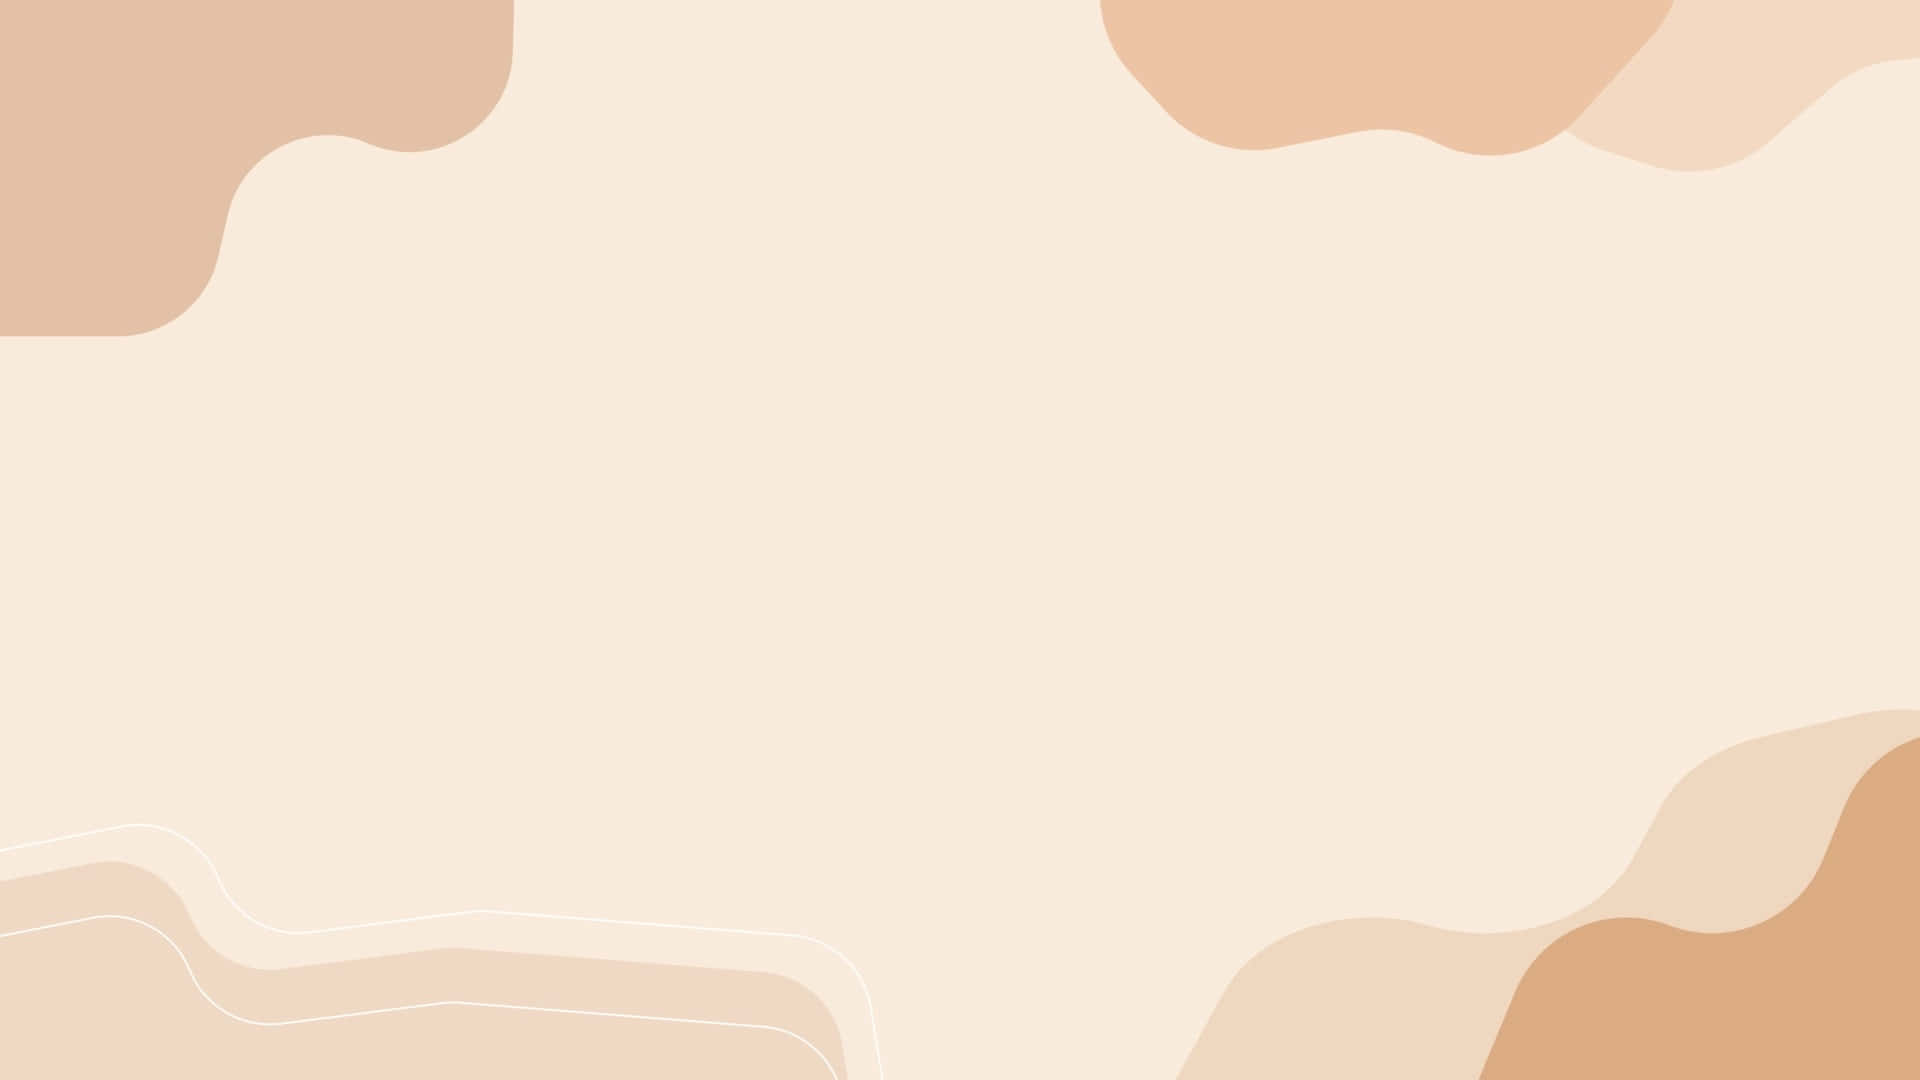 A Minimalistic Wall In Shades Of Brown Background